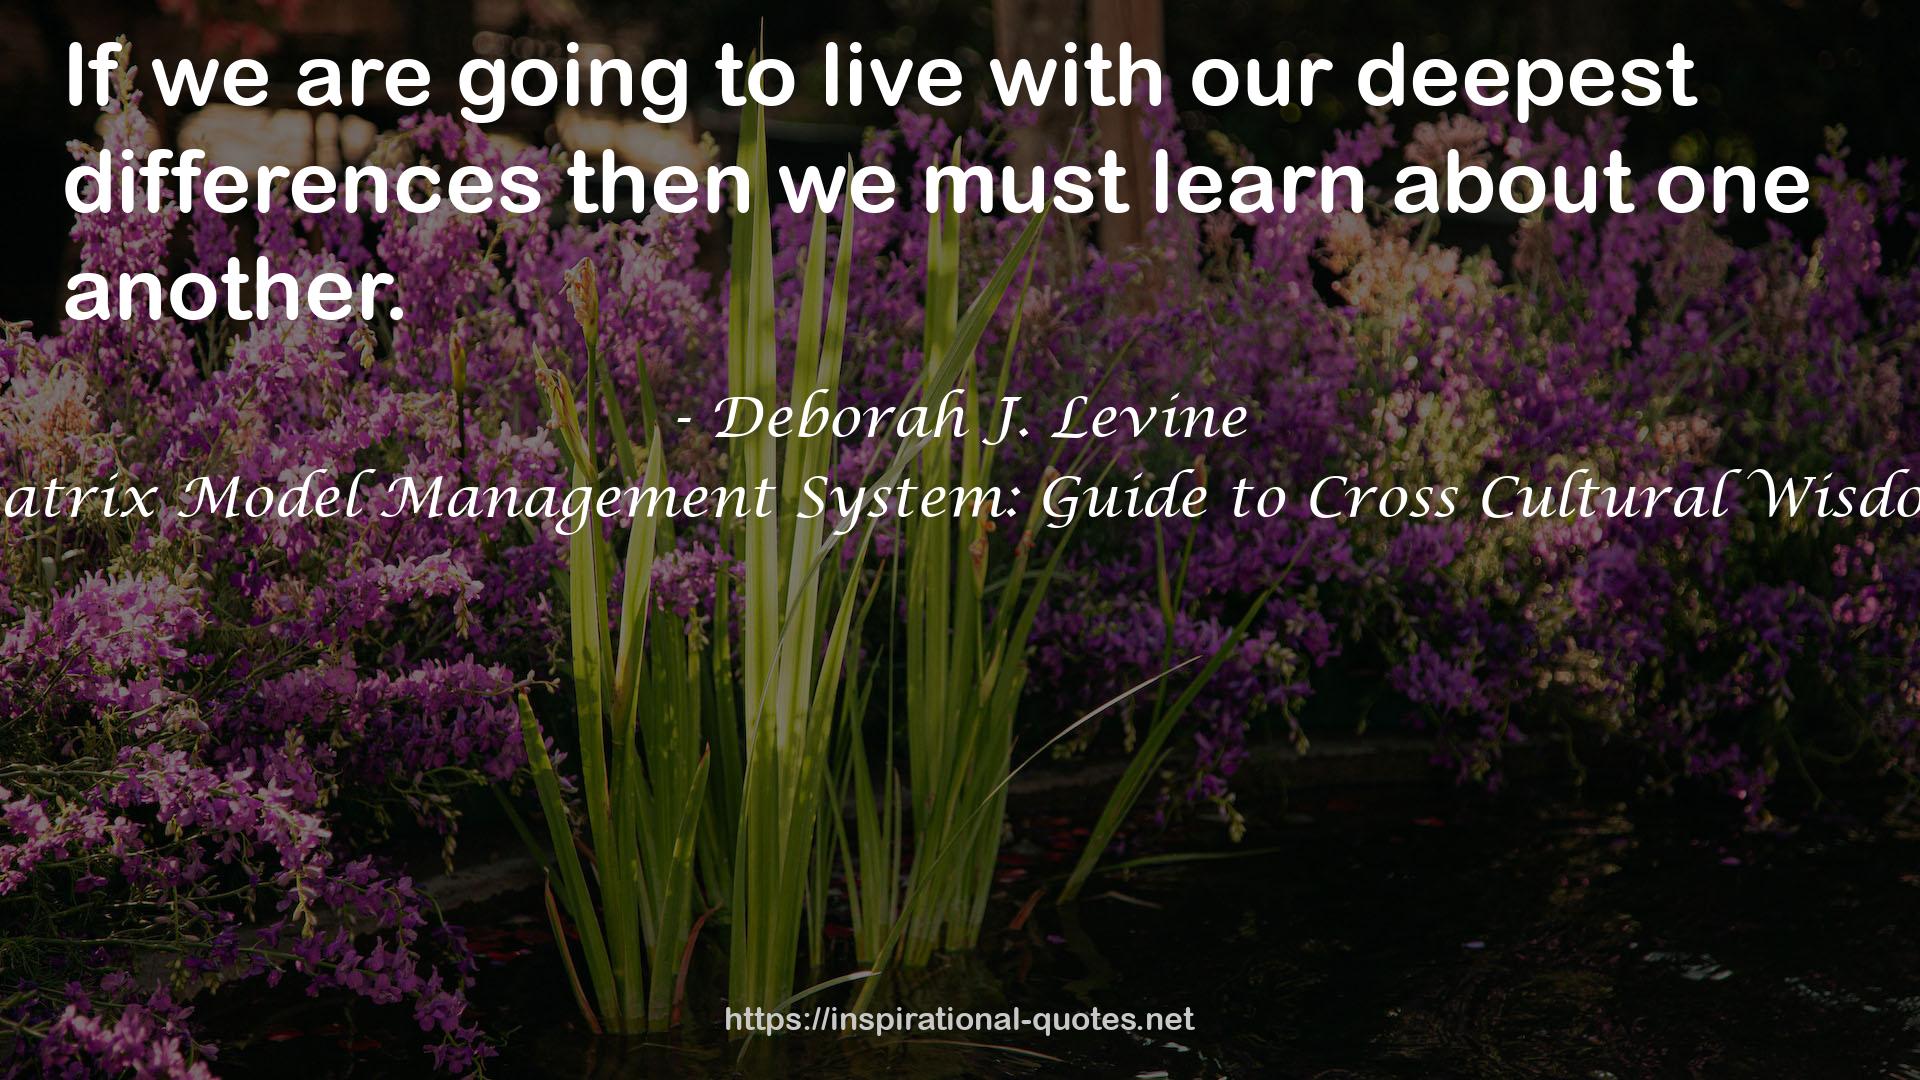 Matrix Model Management System: Guide to Cross Cultural Wisdom QUOTES